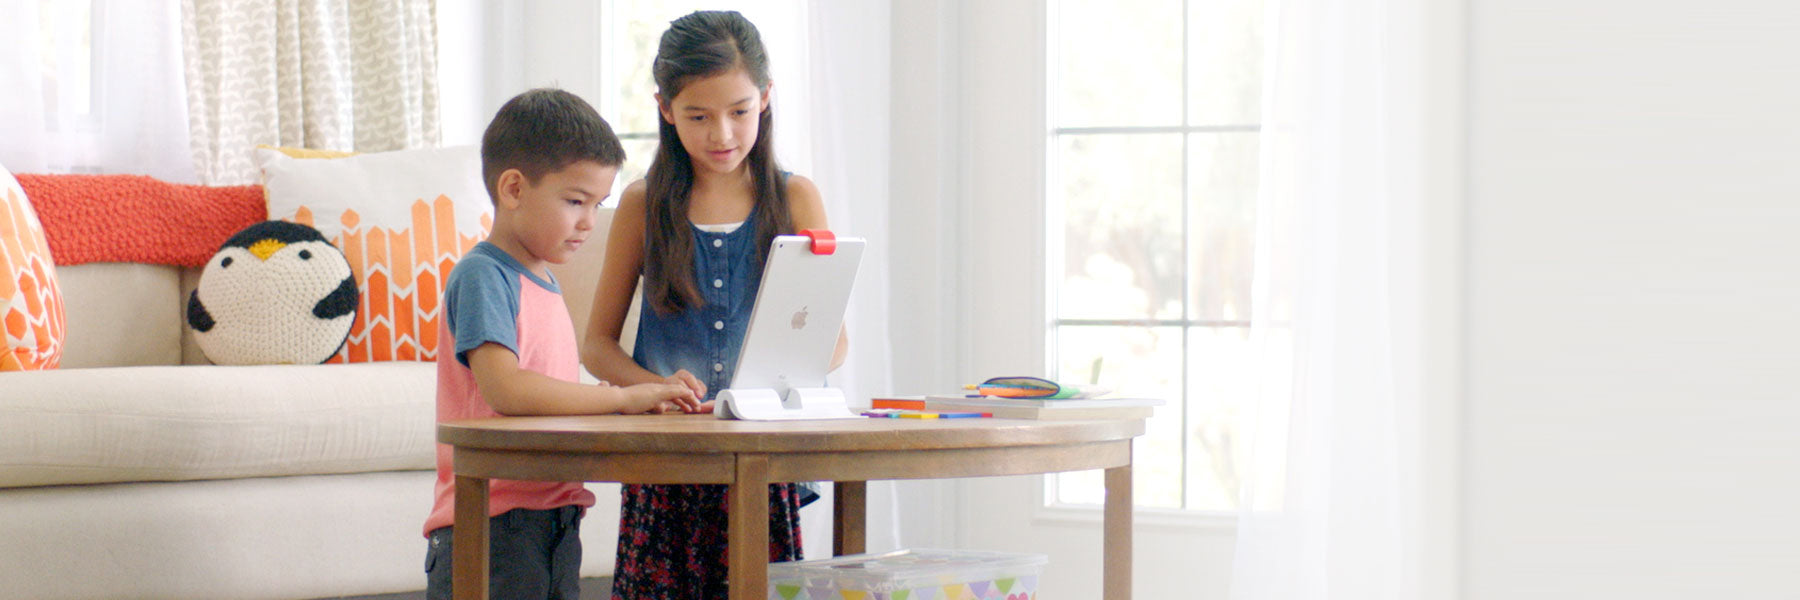 OSMO - iPad Educational Gaming System For Kids